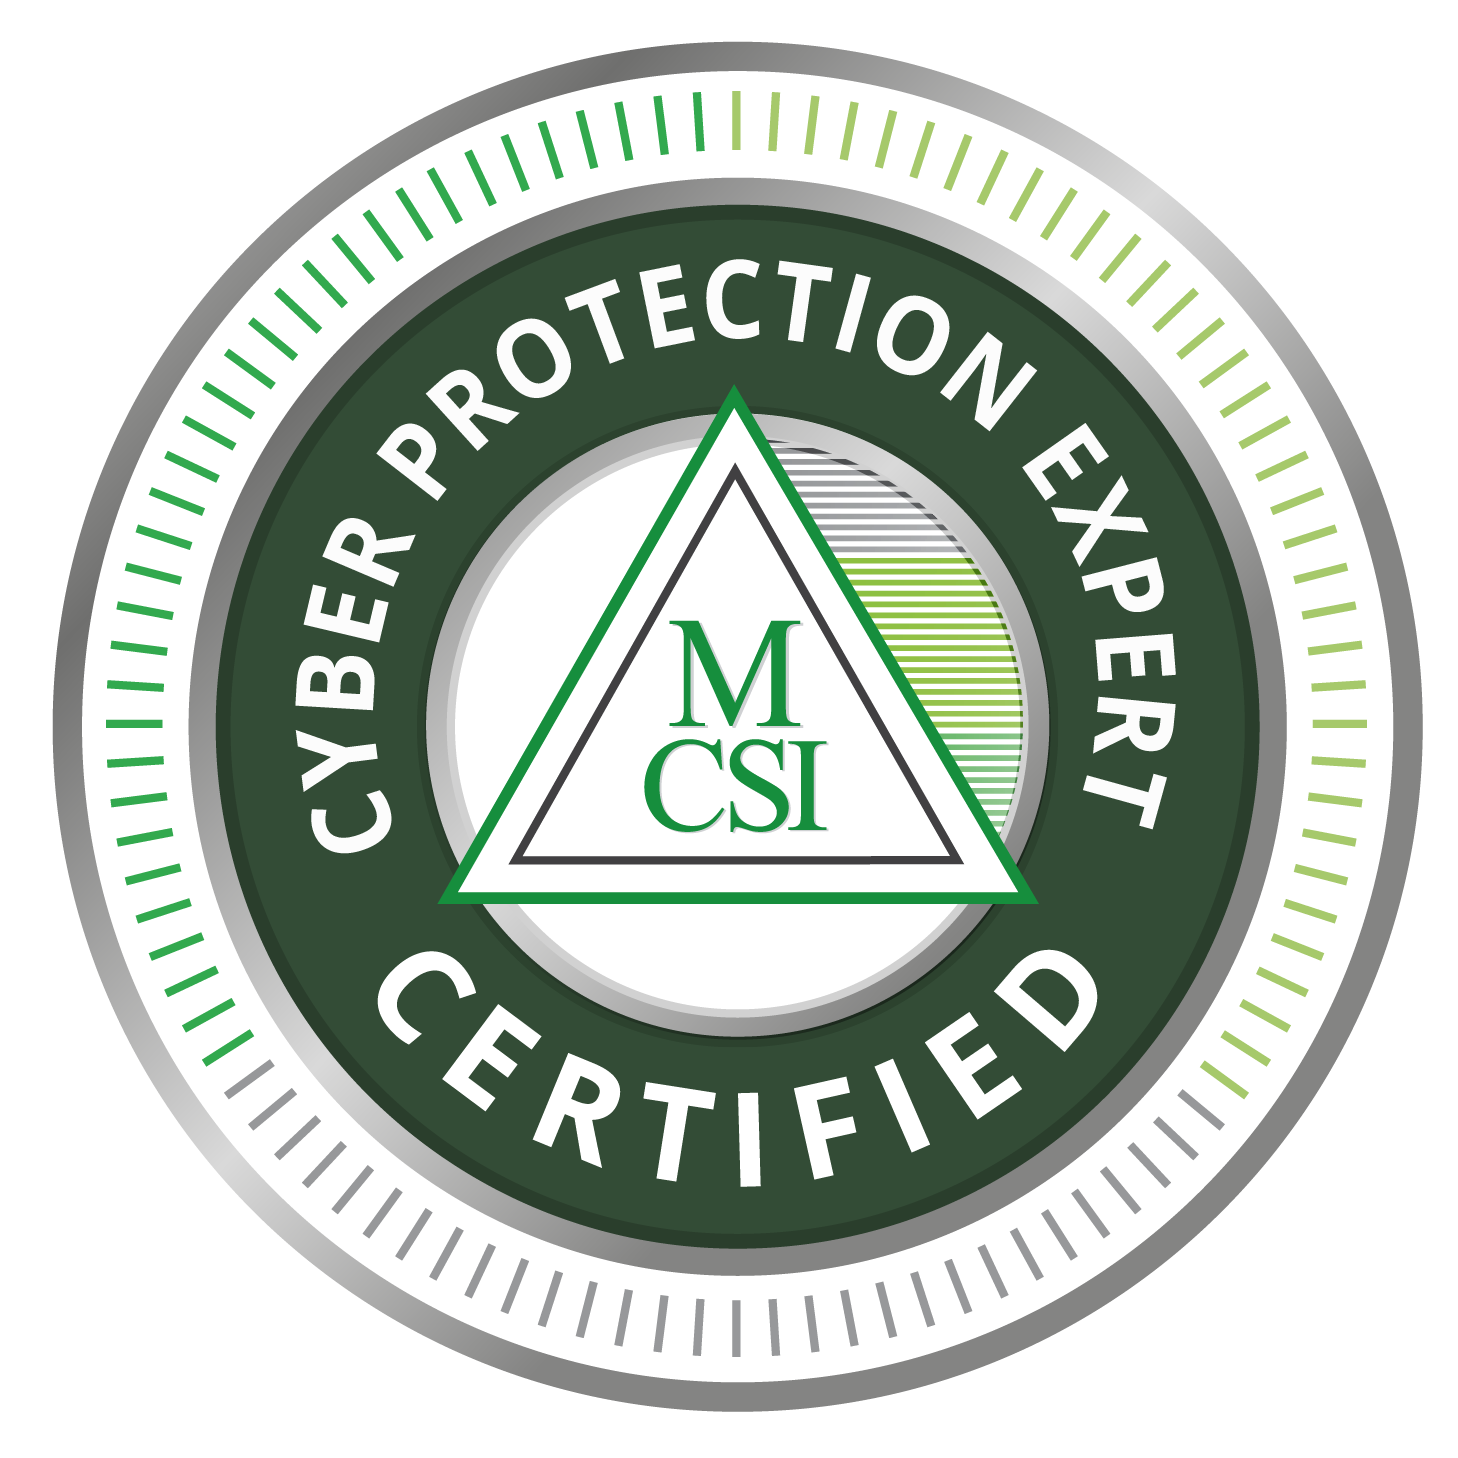 MCPE - Certified Cyber Protection Expert | MCSI Certifications